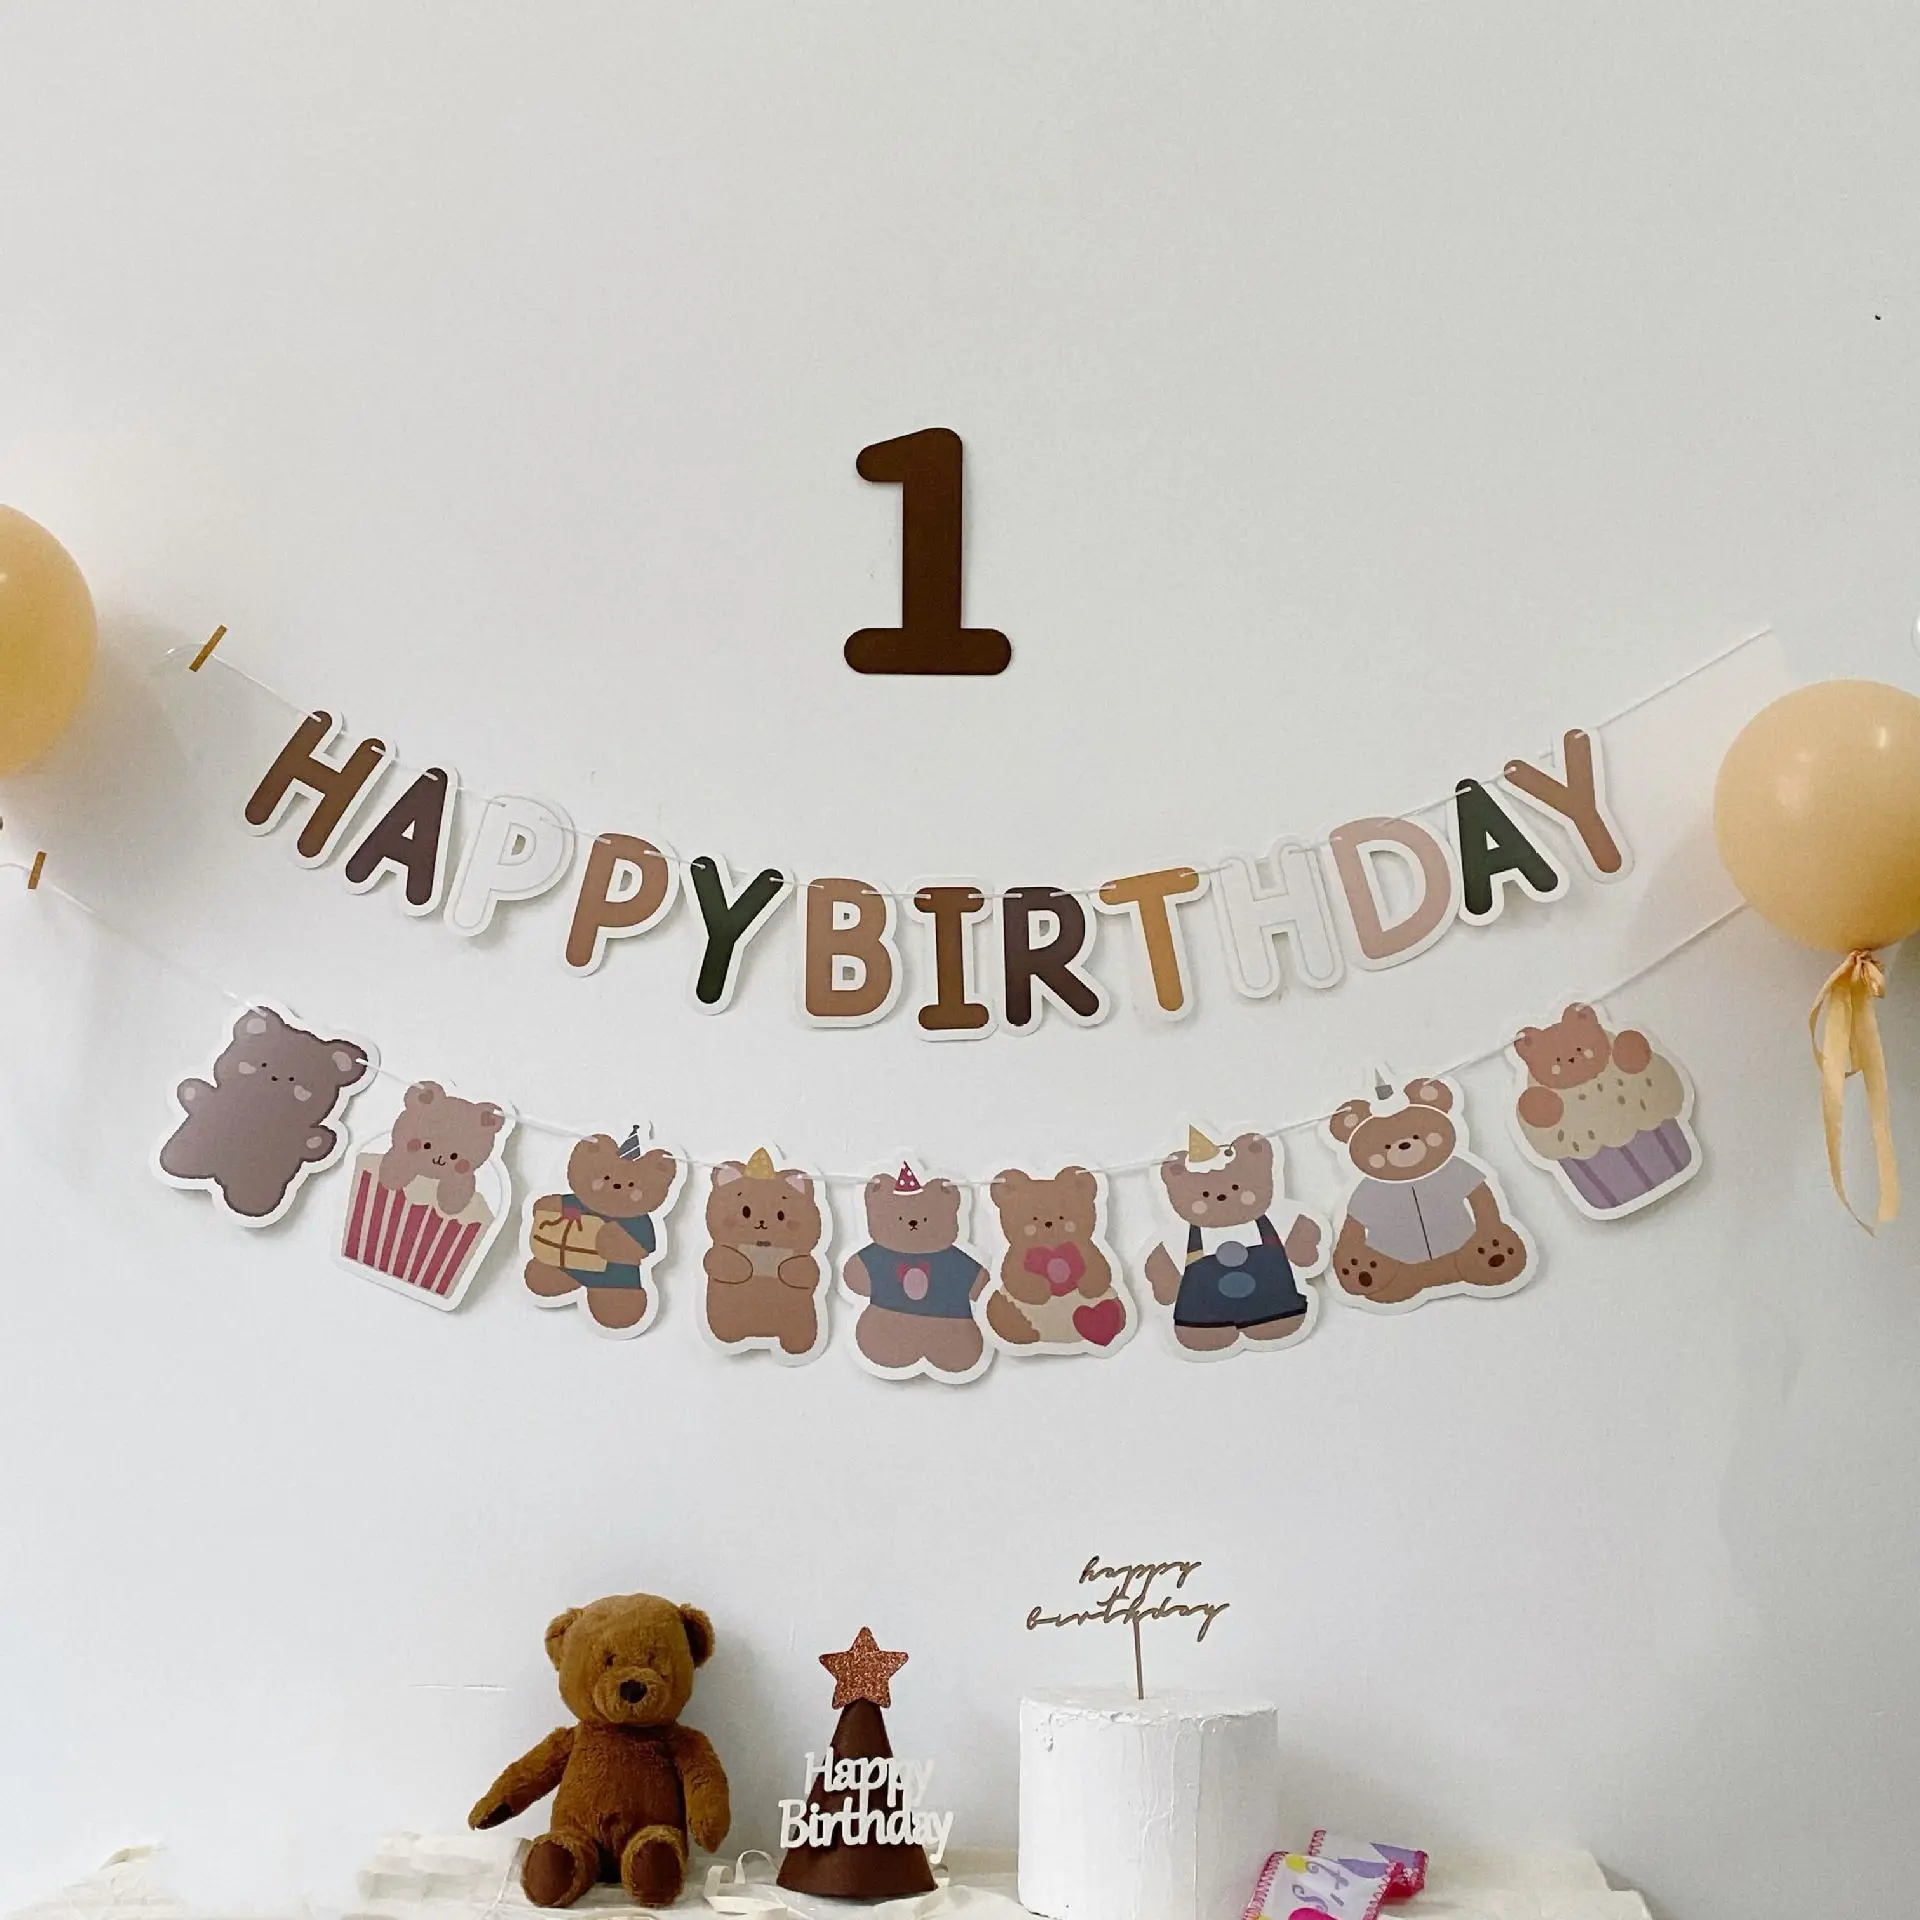 

Cute Bear Happy Birthday Decoration Balloons Rose Gold Letter Foil Ballons Birthday Party Decorations Globos Balony Anniversaire